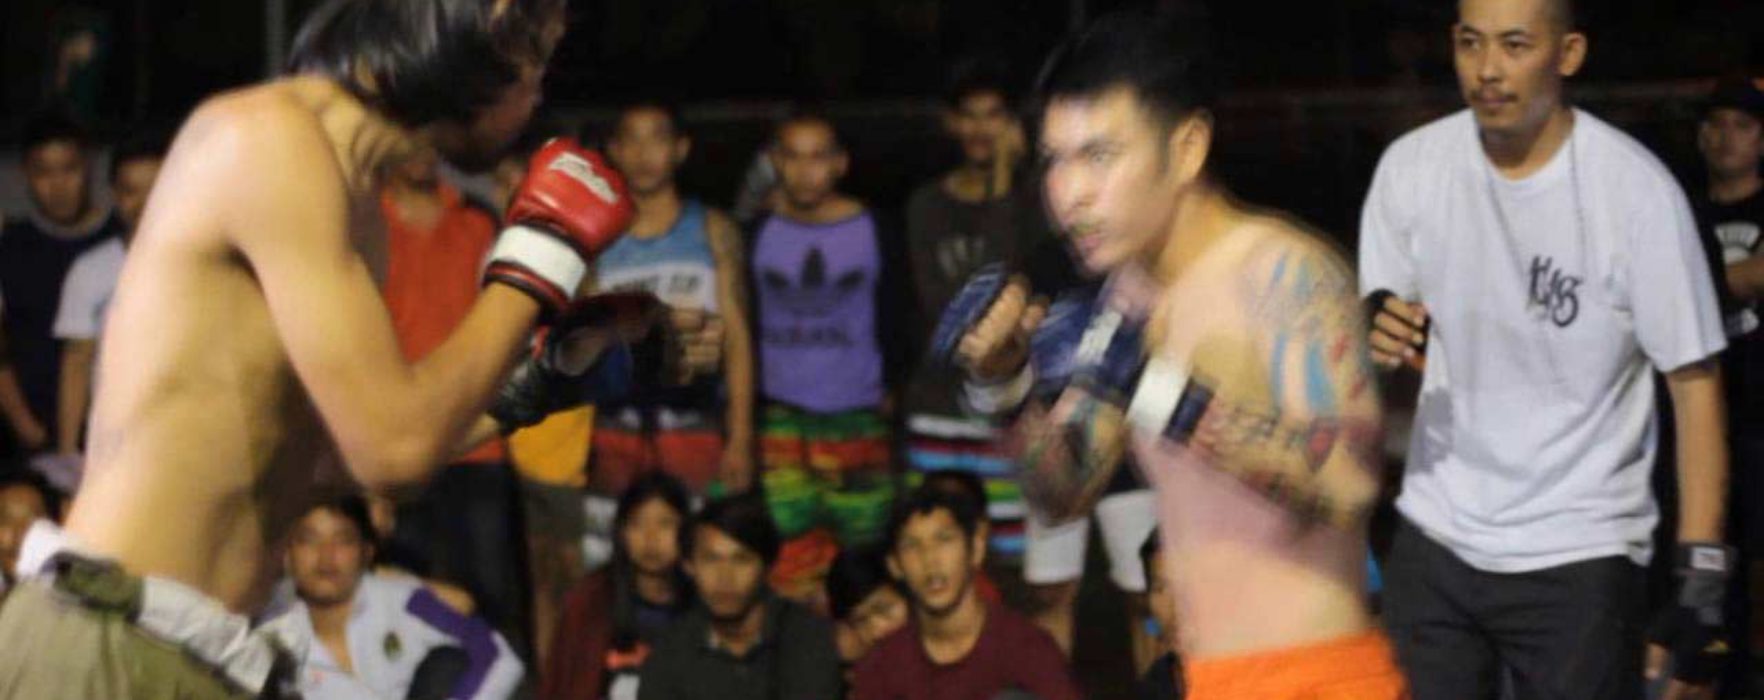 Flash News: Thailand gets into “Fight Clubs”